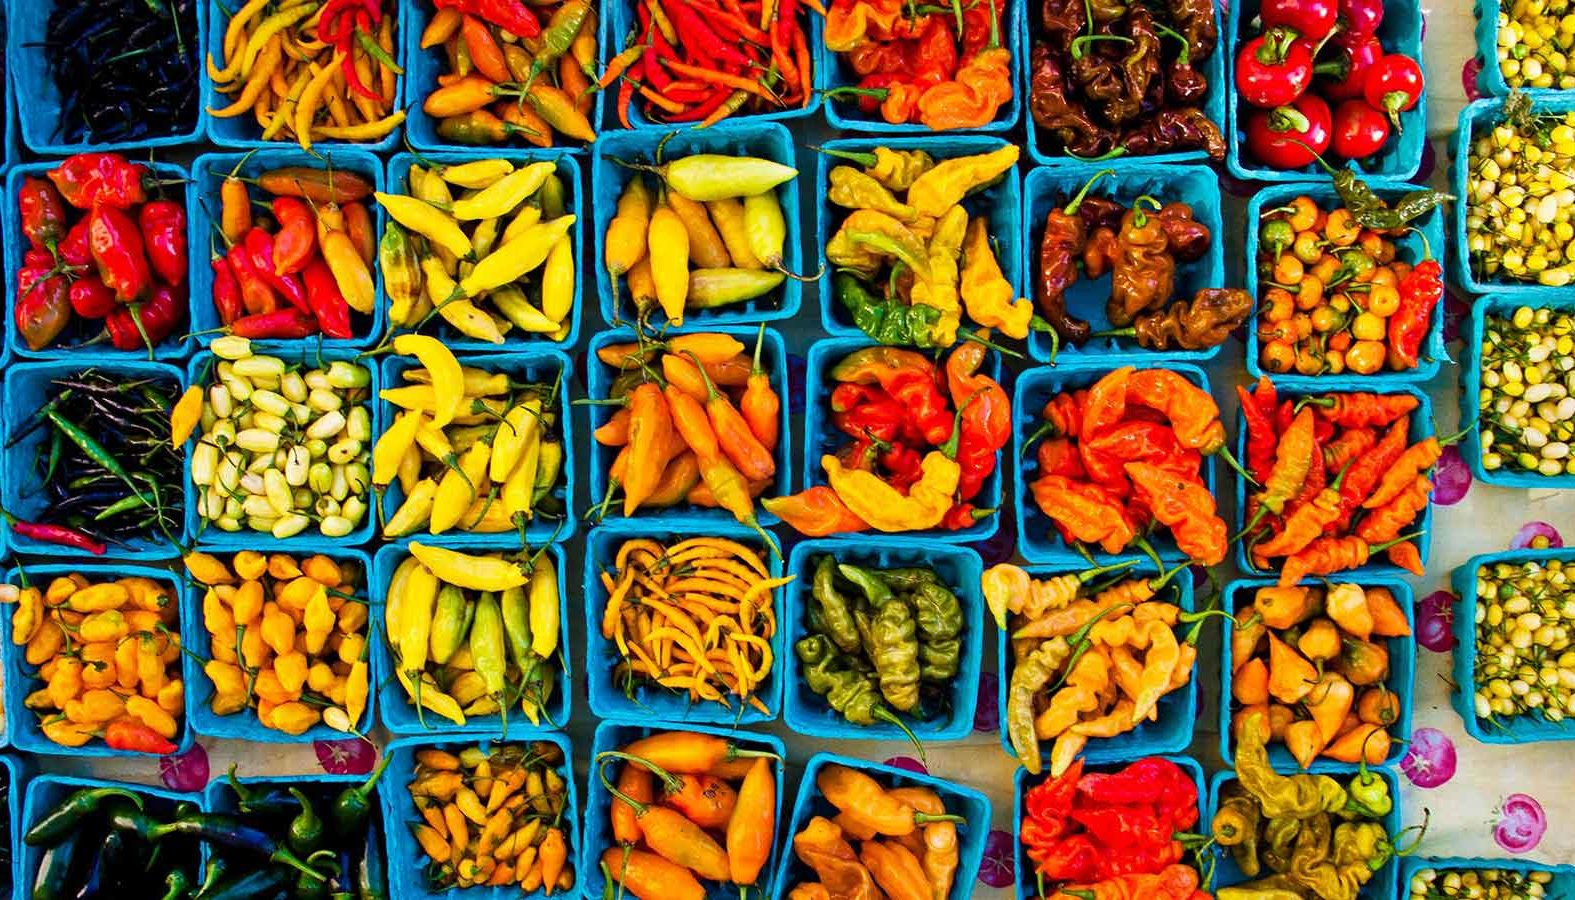 An overview of various chili peppers